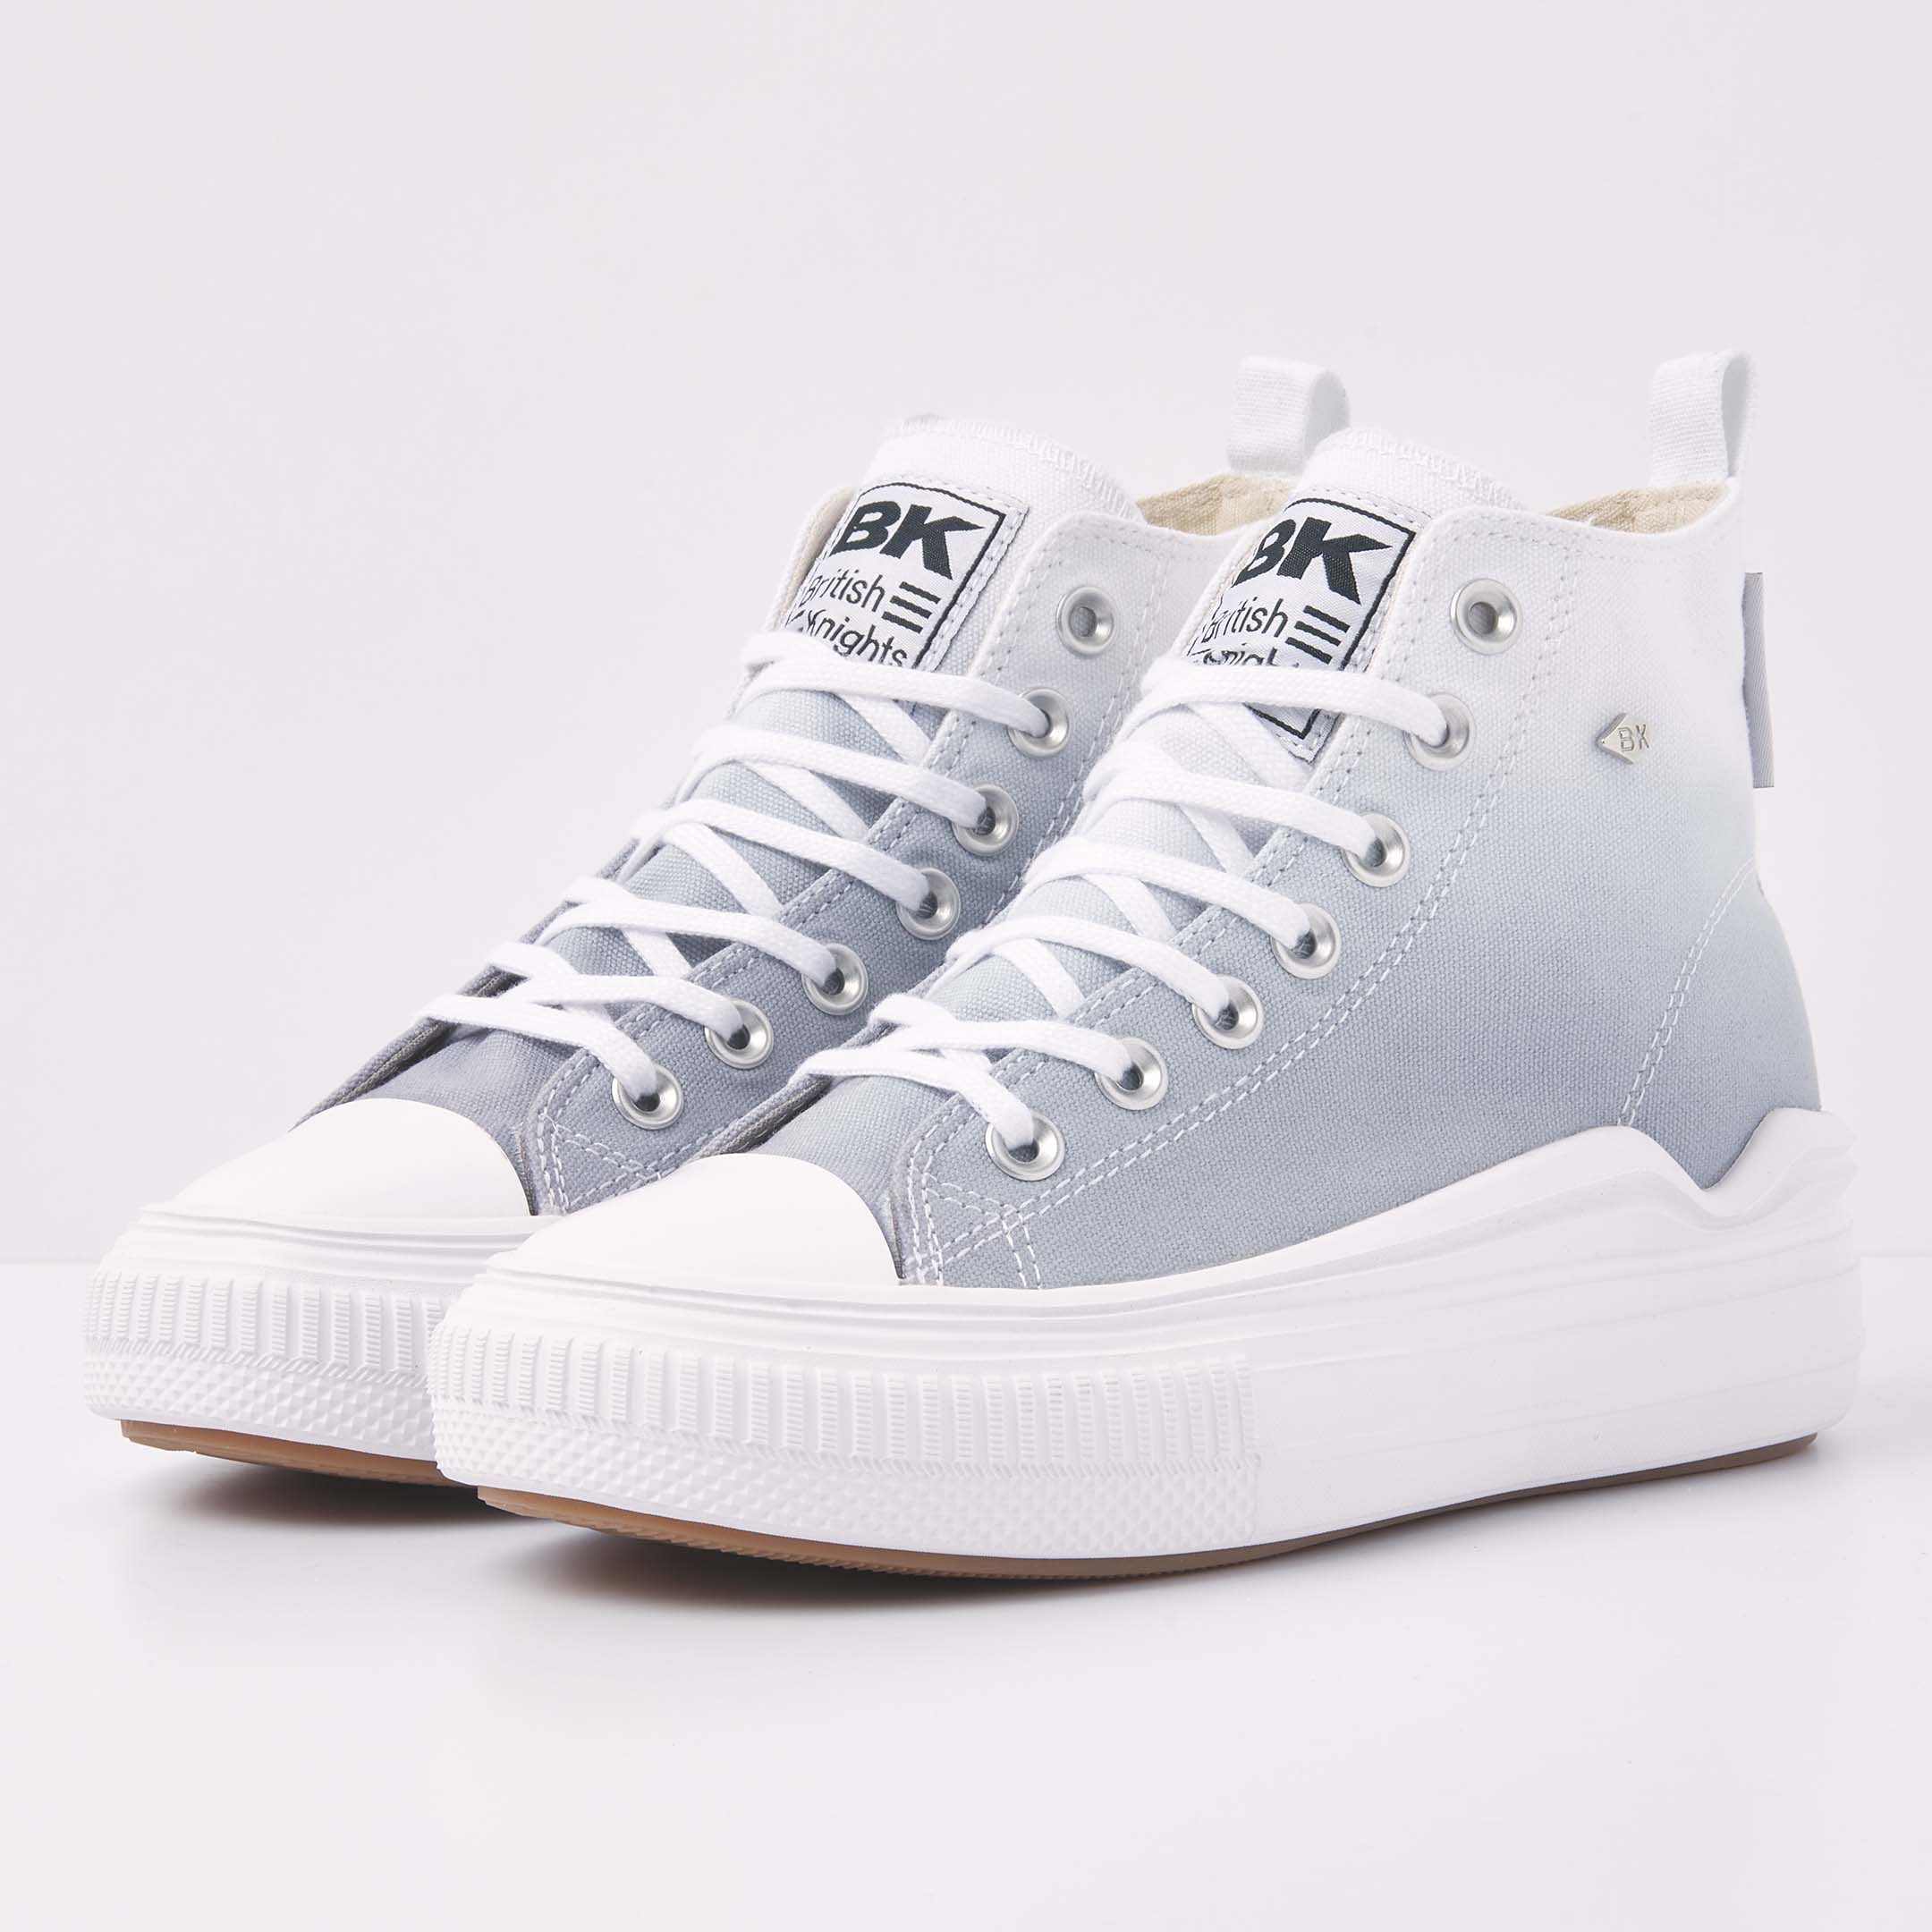 British Knights Sneaker Front view  B51-3736-04 KAYA FLOW MID HIGH-TOP FEMALE